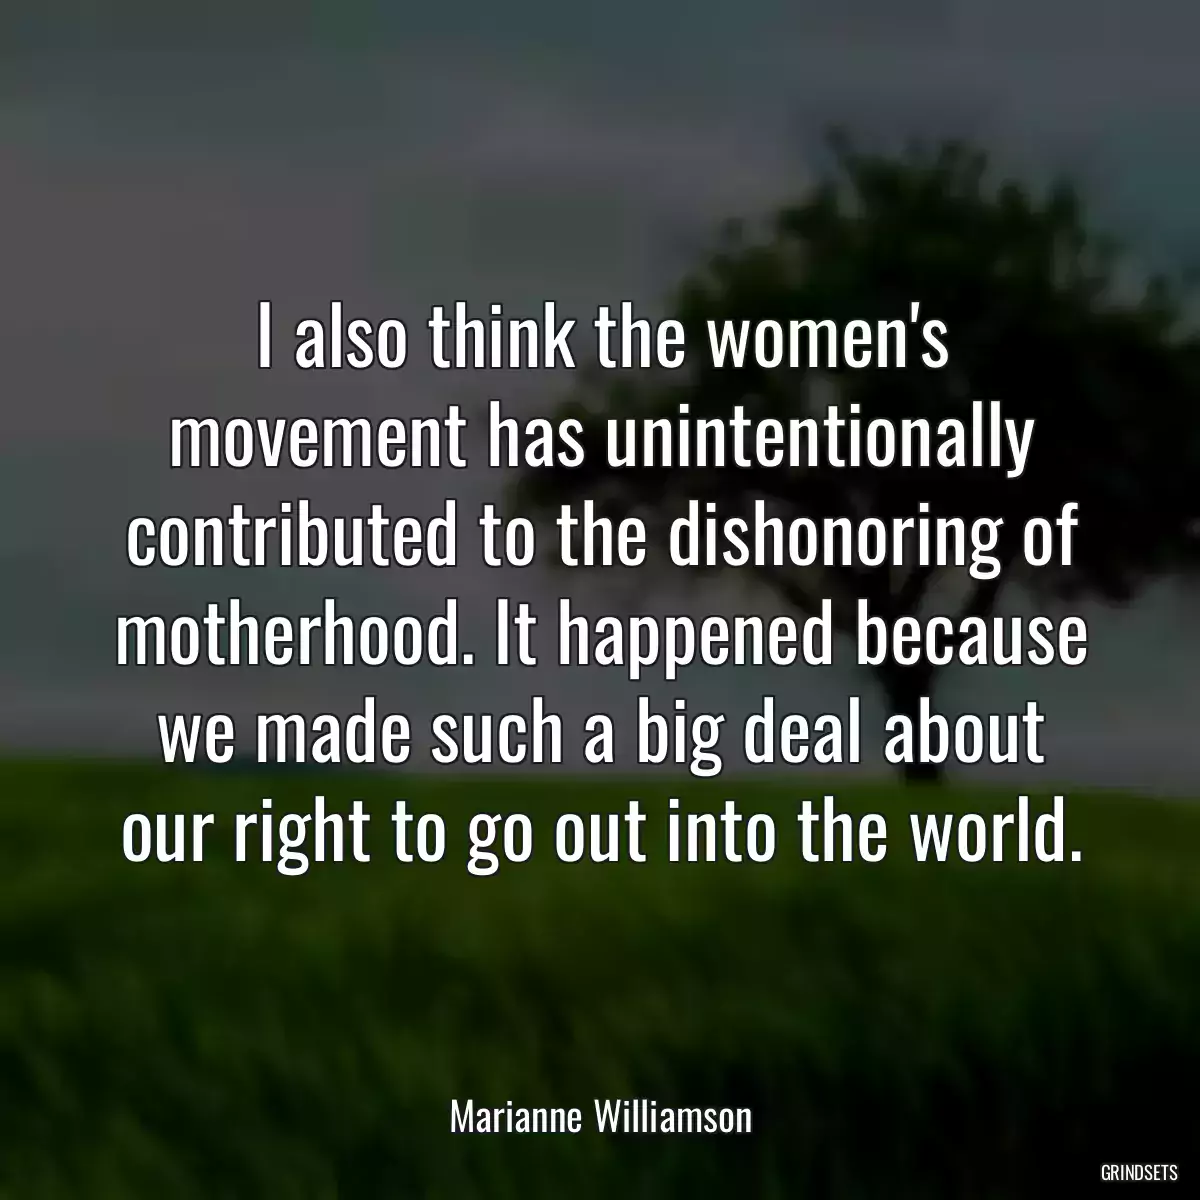 I also think the women\'s movement has unintentionally contributed to the dishonoring of motherhood. It happened because we made such a big deal about our right to go out into the world.